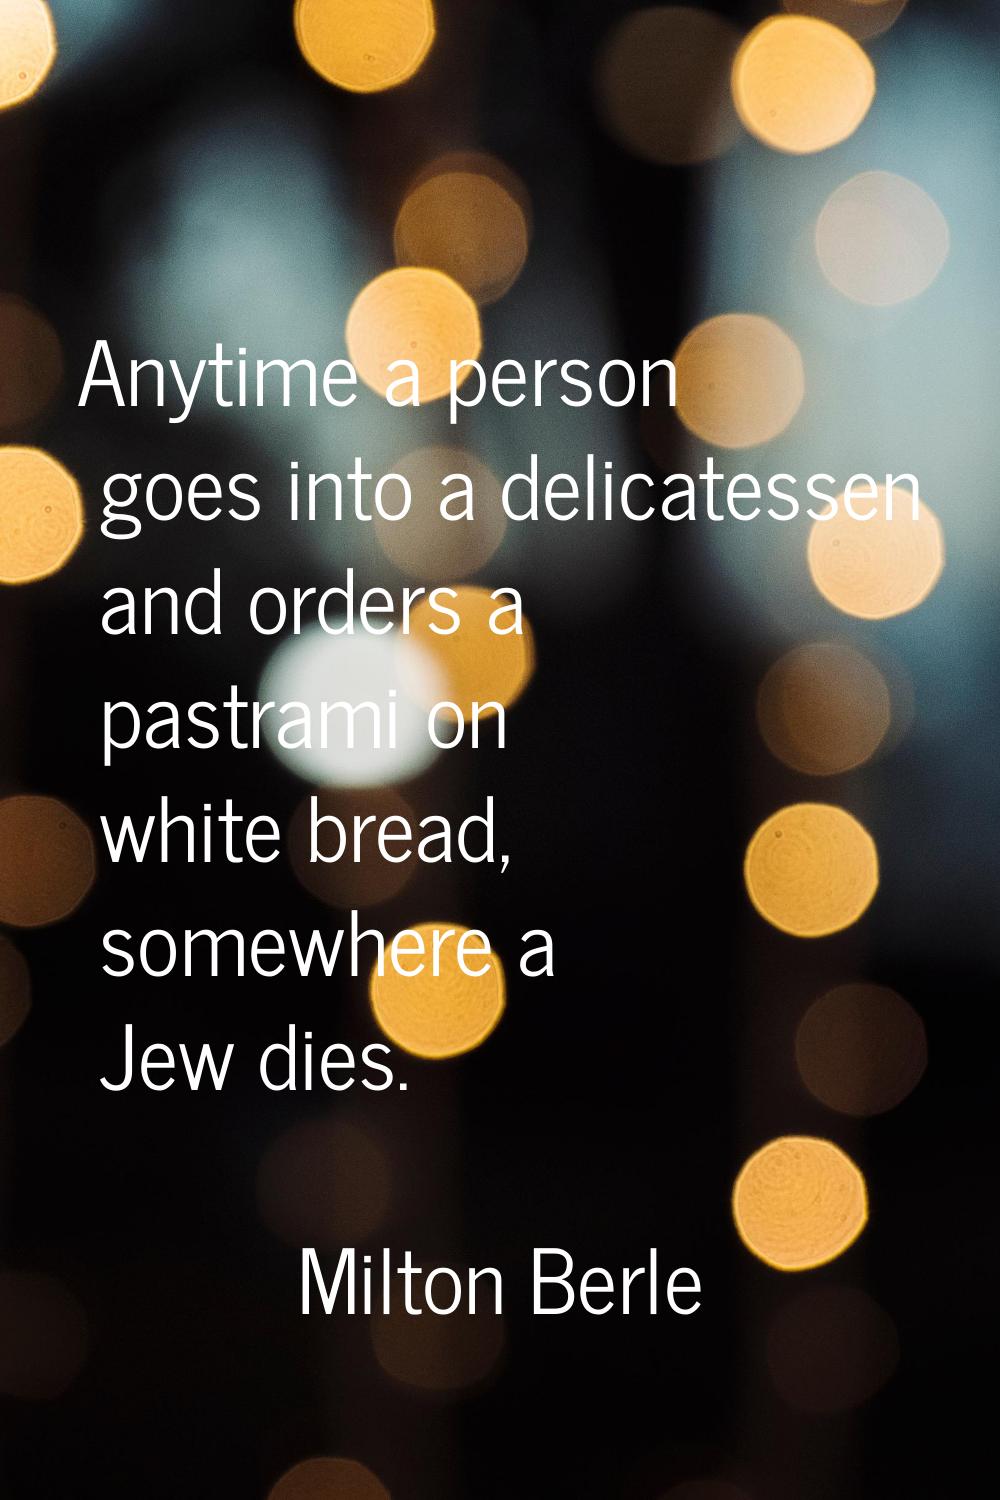 Anytime a person goes into a delicatessen and orders a pastrami on white bread, somewhere a Jew die